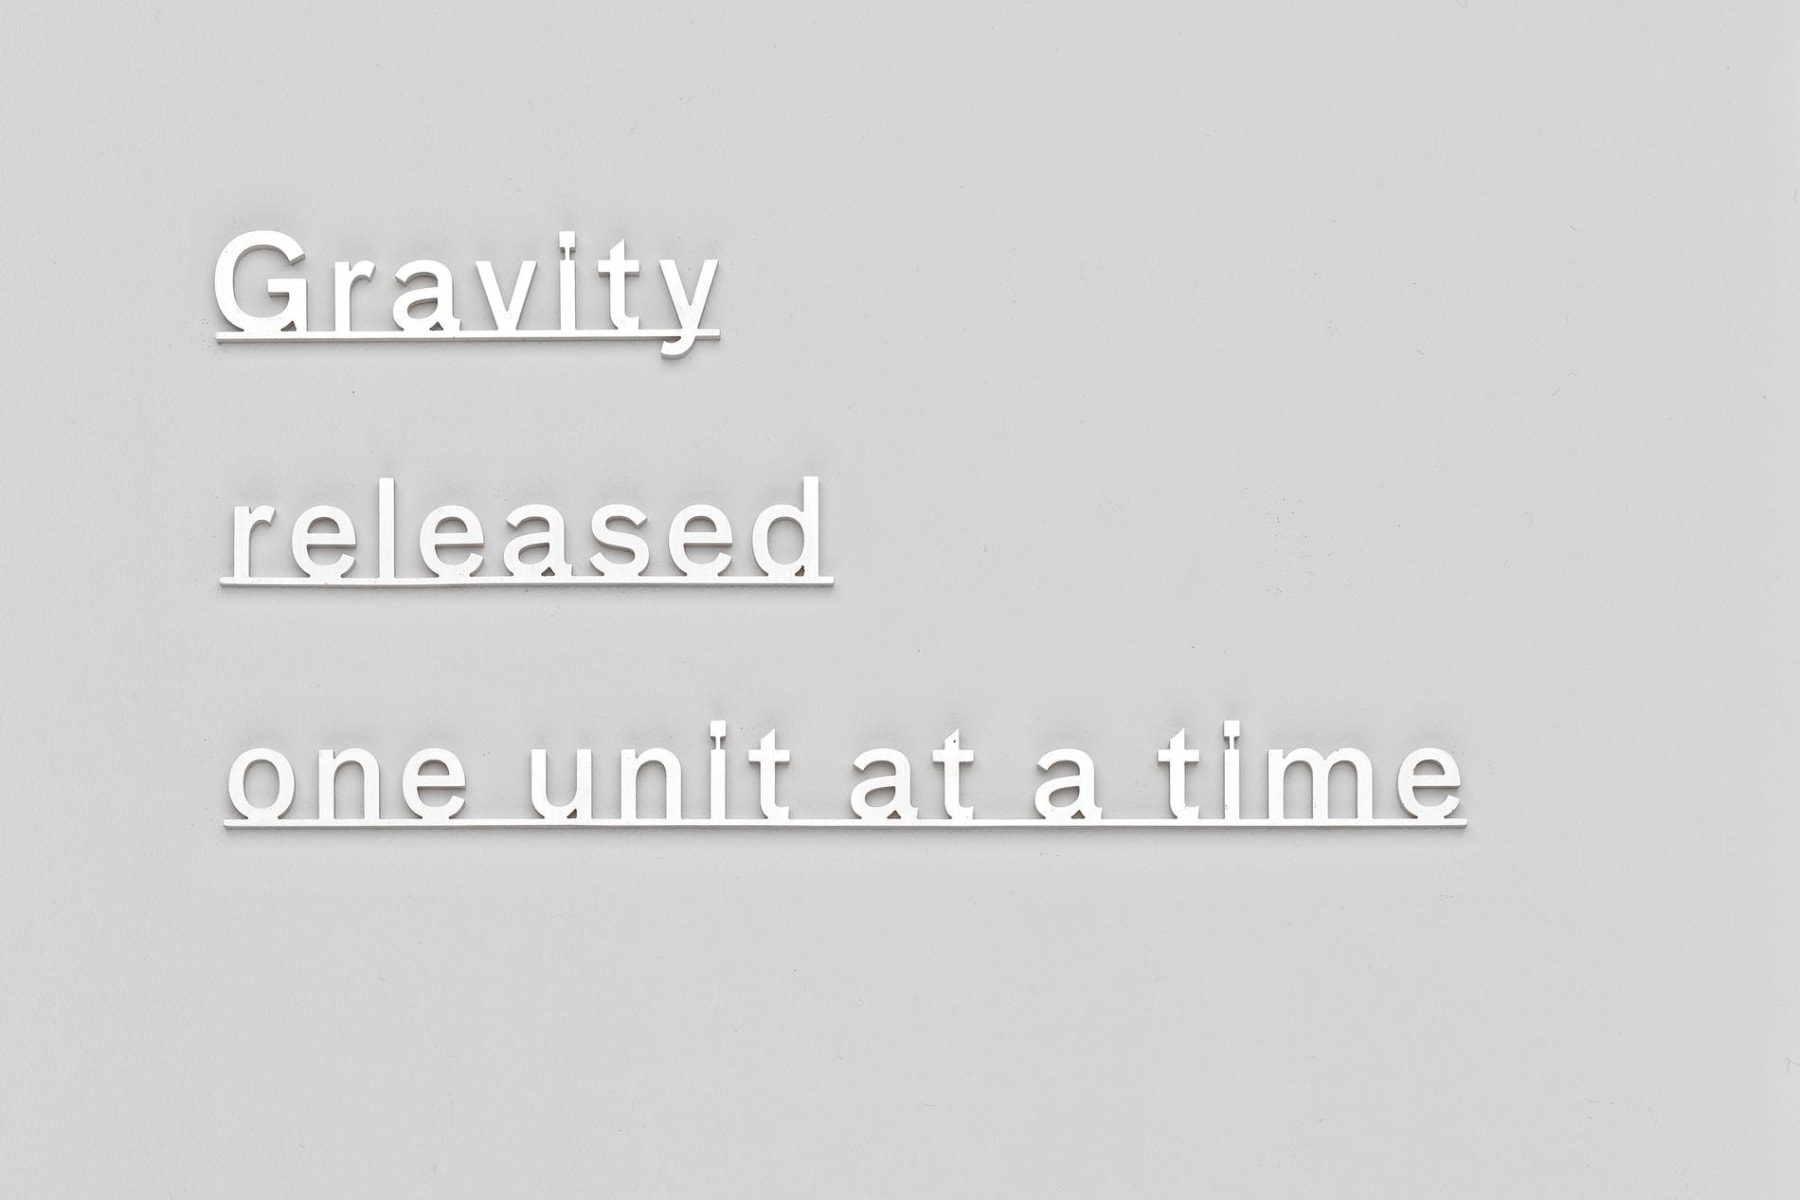 Image of KATIE PATERSON's Gravity released one unit at a time, 2015